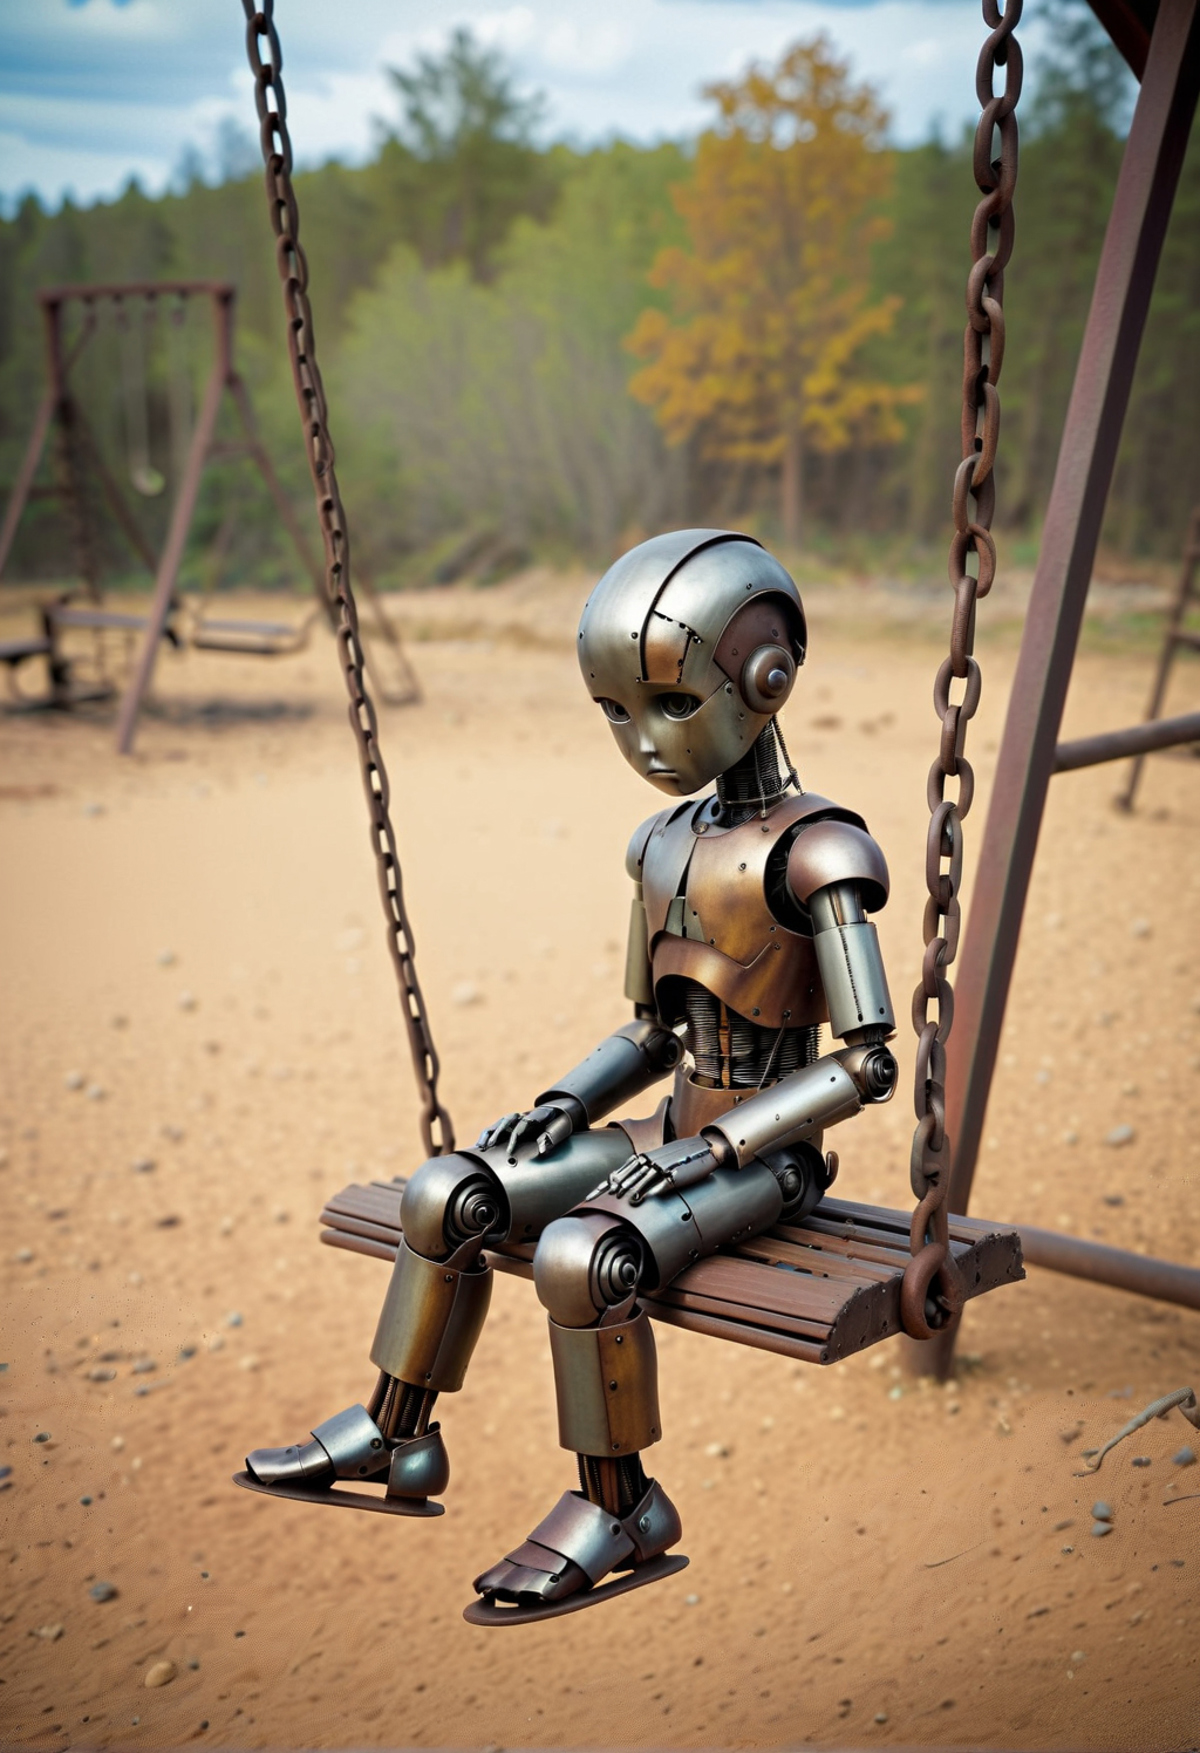 A robot doll sitting on a swing in a park.